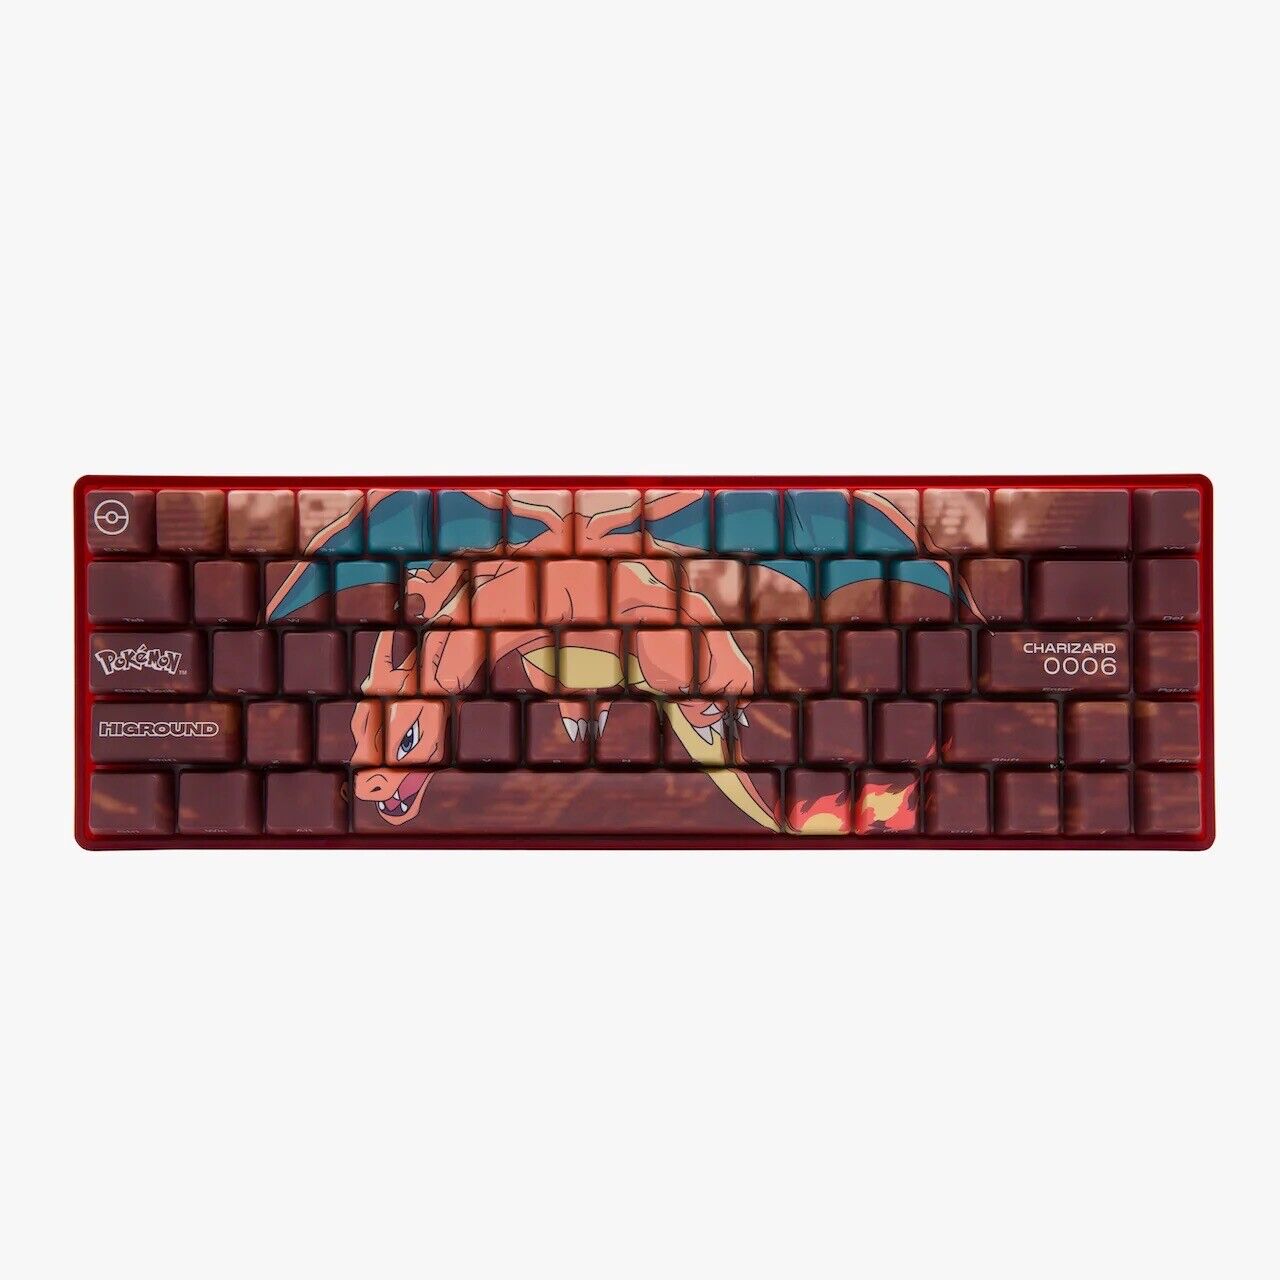 Pokemon x Higround Base 65 Keyboard - Charizard Limited Edition - NEW IN HAND